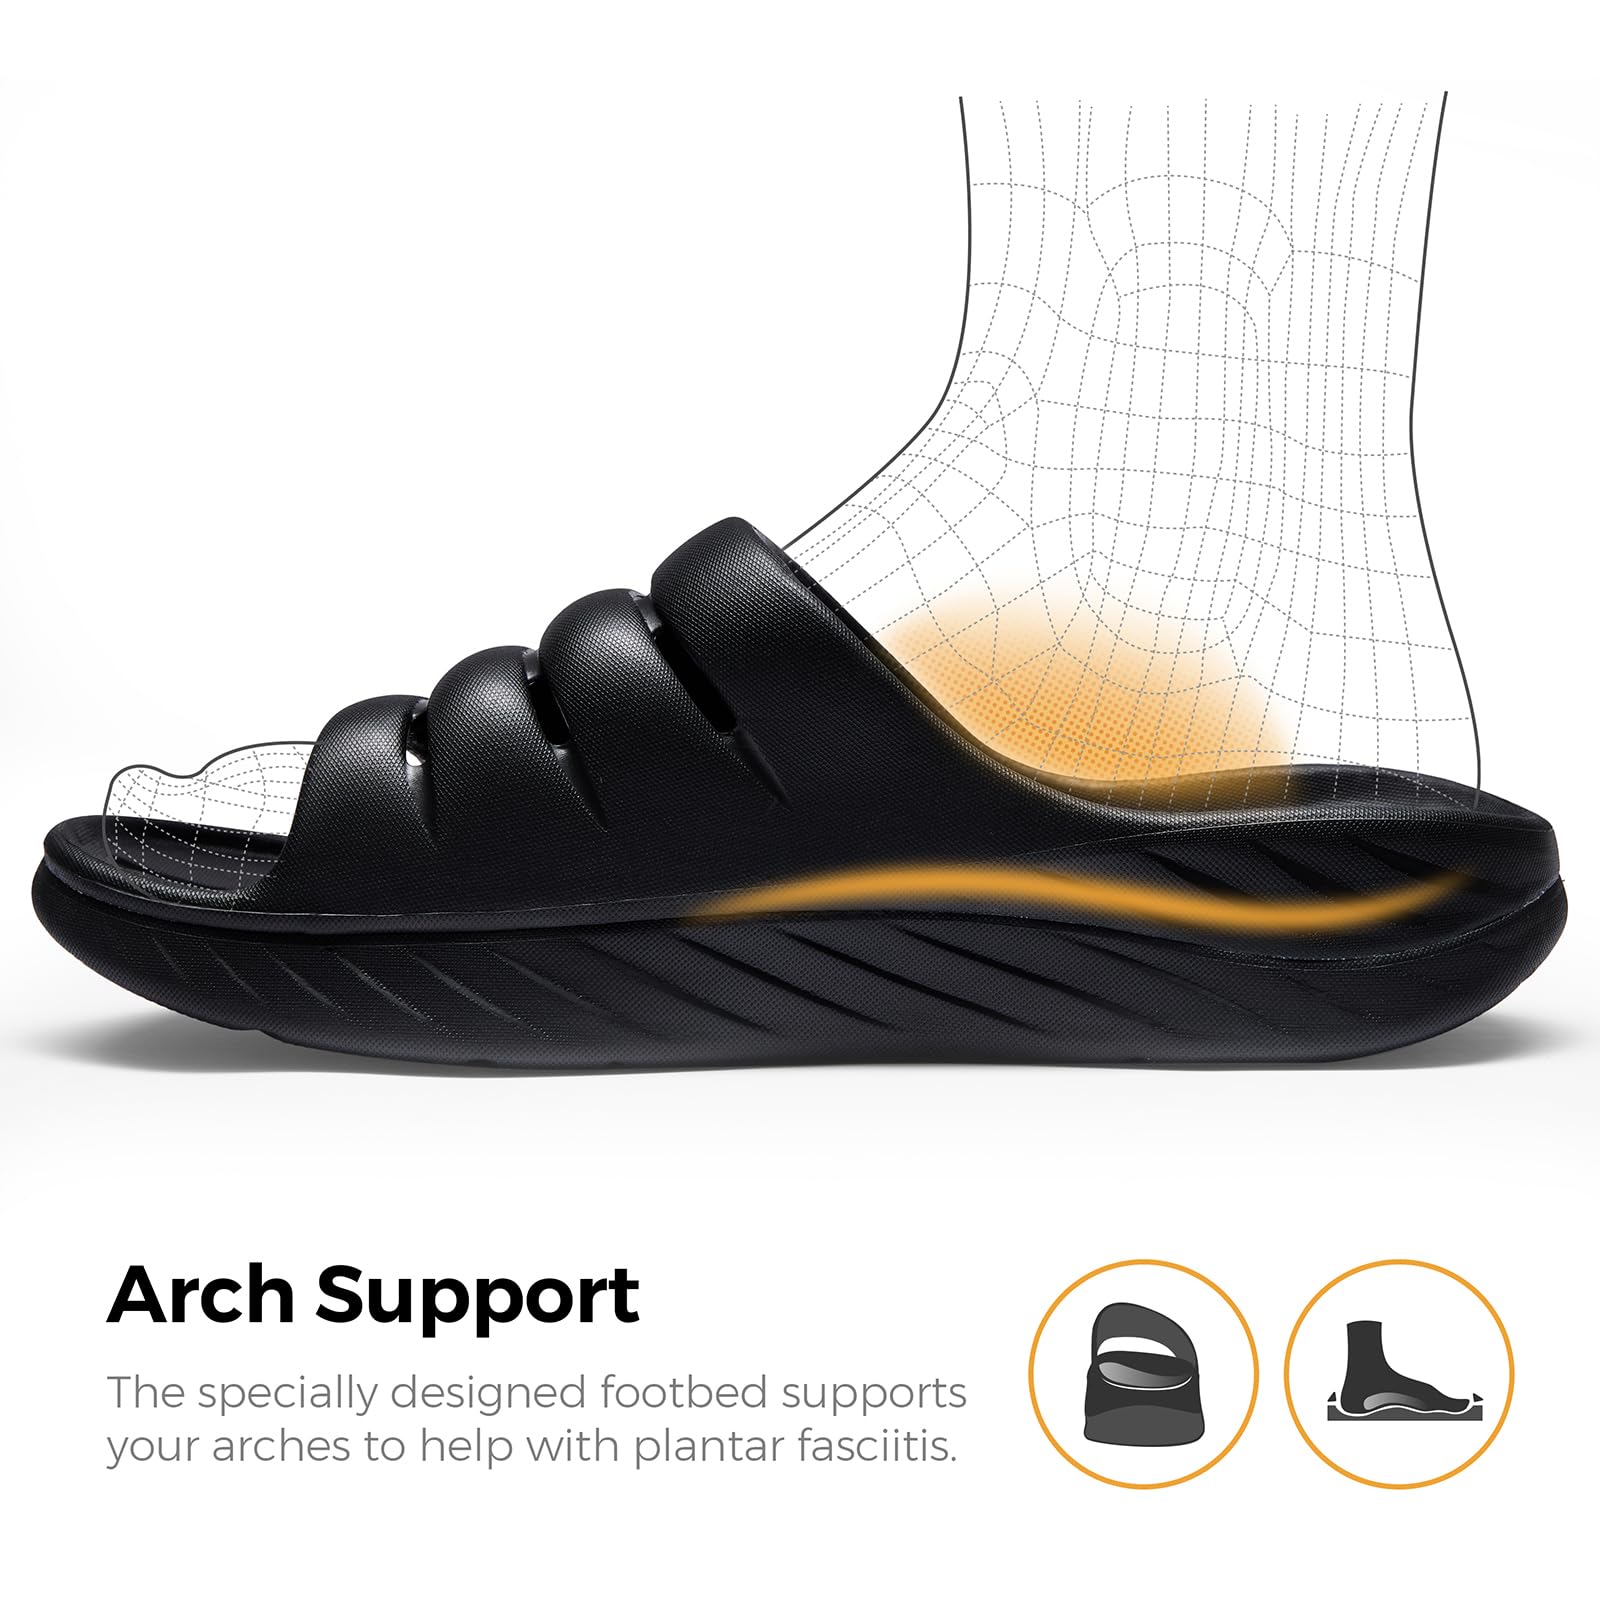 AIRHAS Recovery Sandals for Men and Women Orthotic Plantar Fasciitis Sandals with Arch Support Unisex Open Toe Slides with Cushion